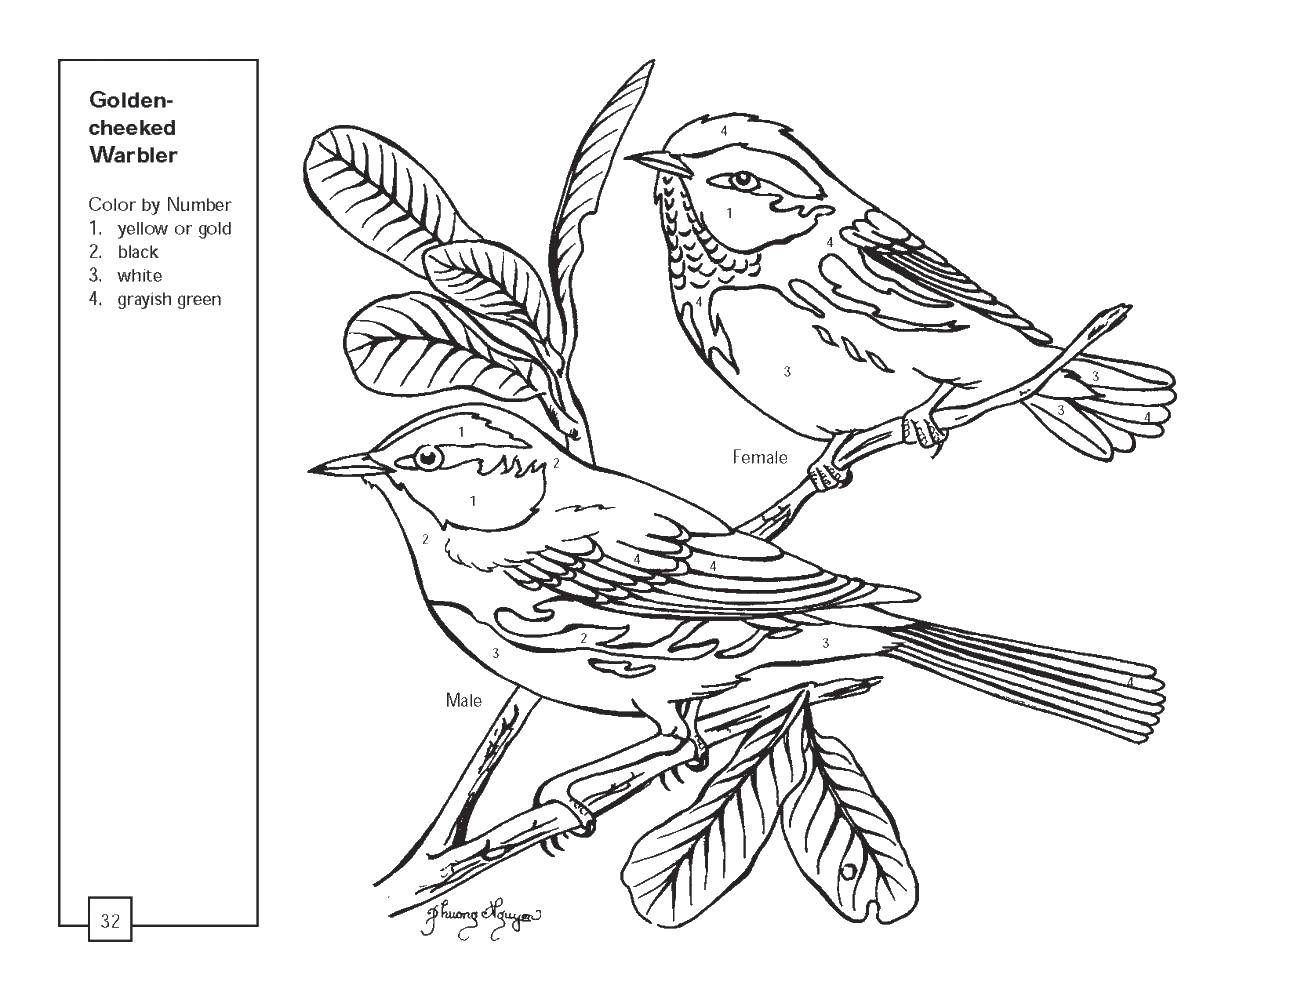 Coloring two birds. Category birds. Tags:  birds, branch.